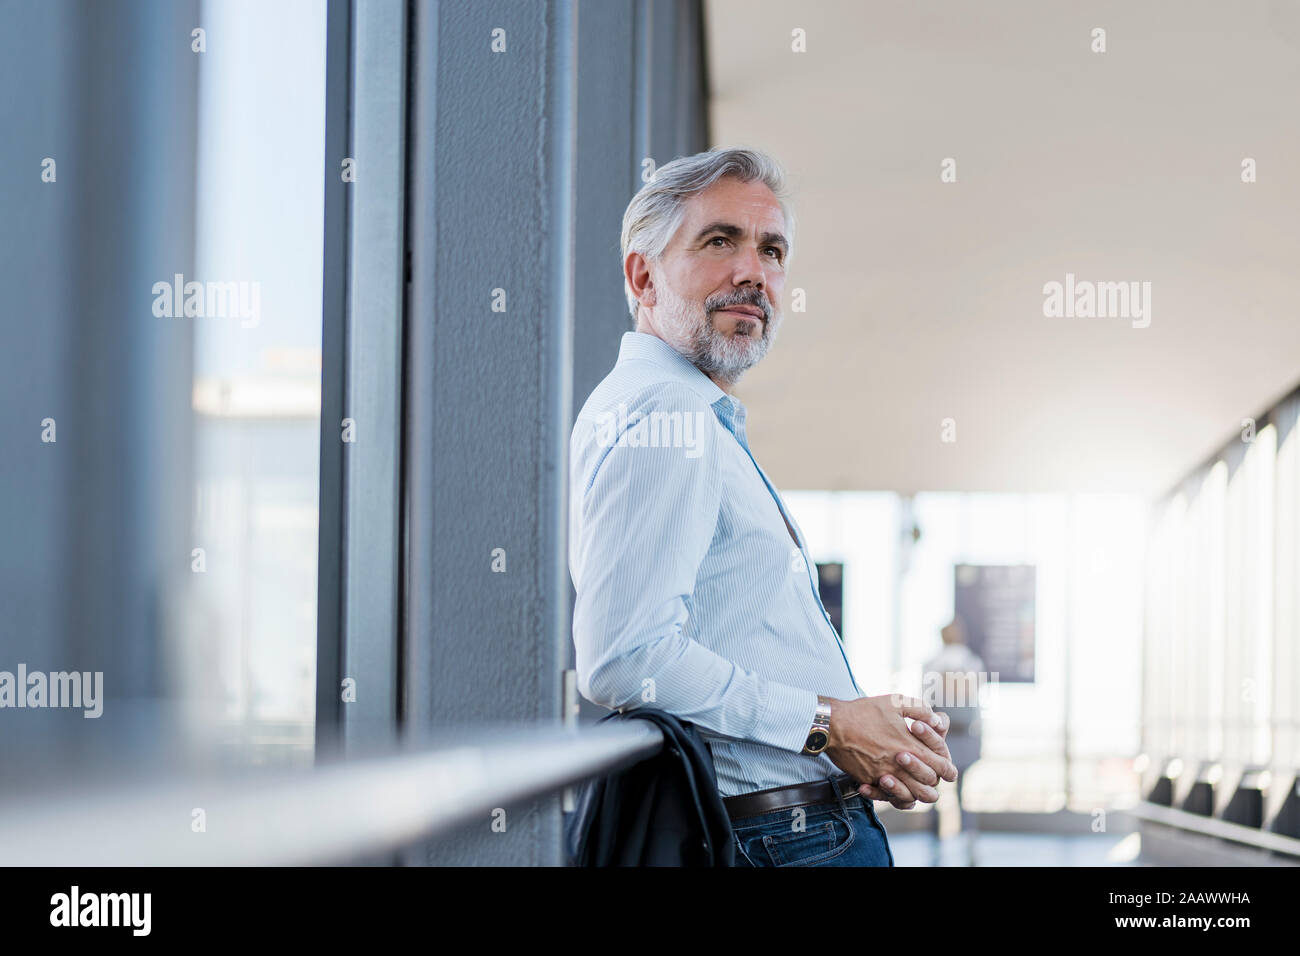 Mature businessman leaning on railing in a passageway Stock Photo